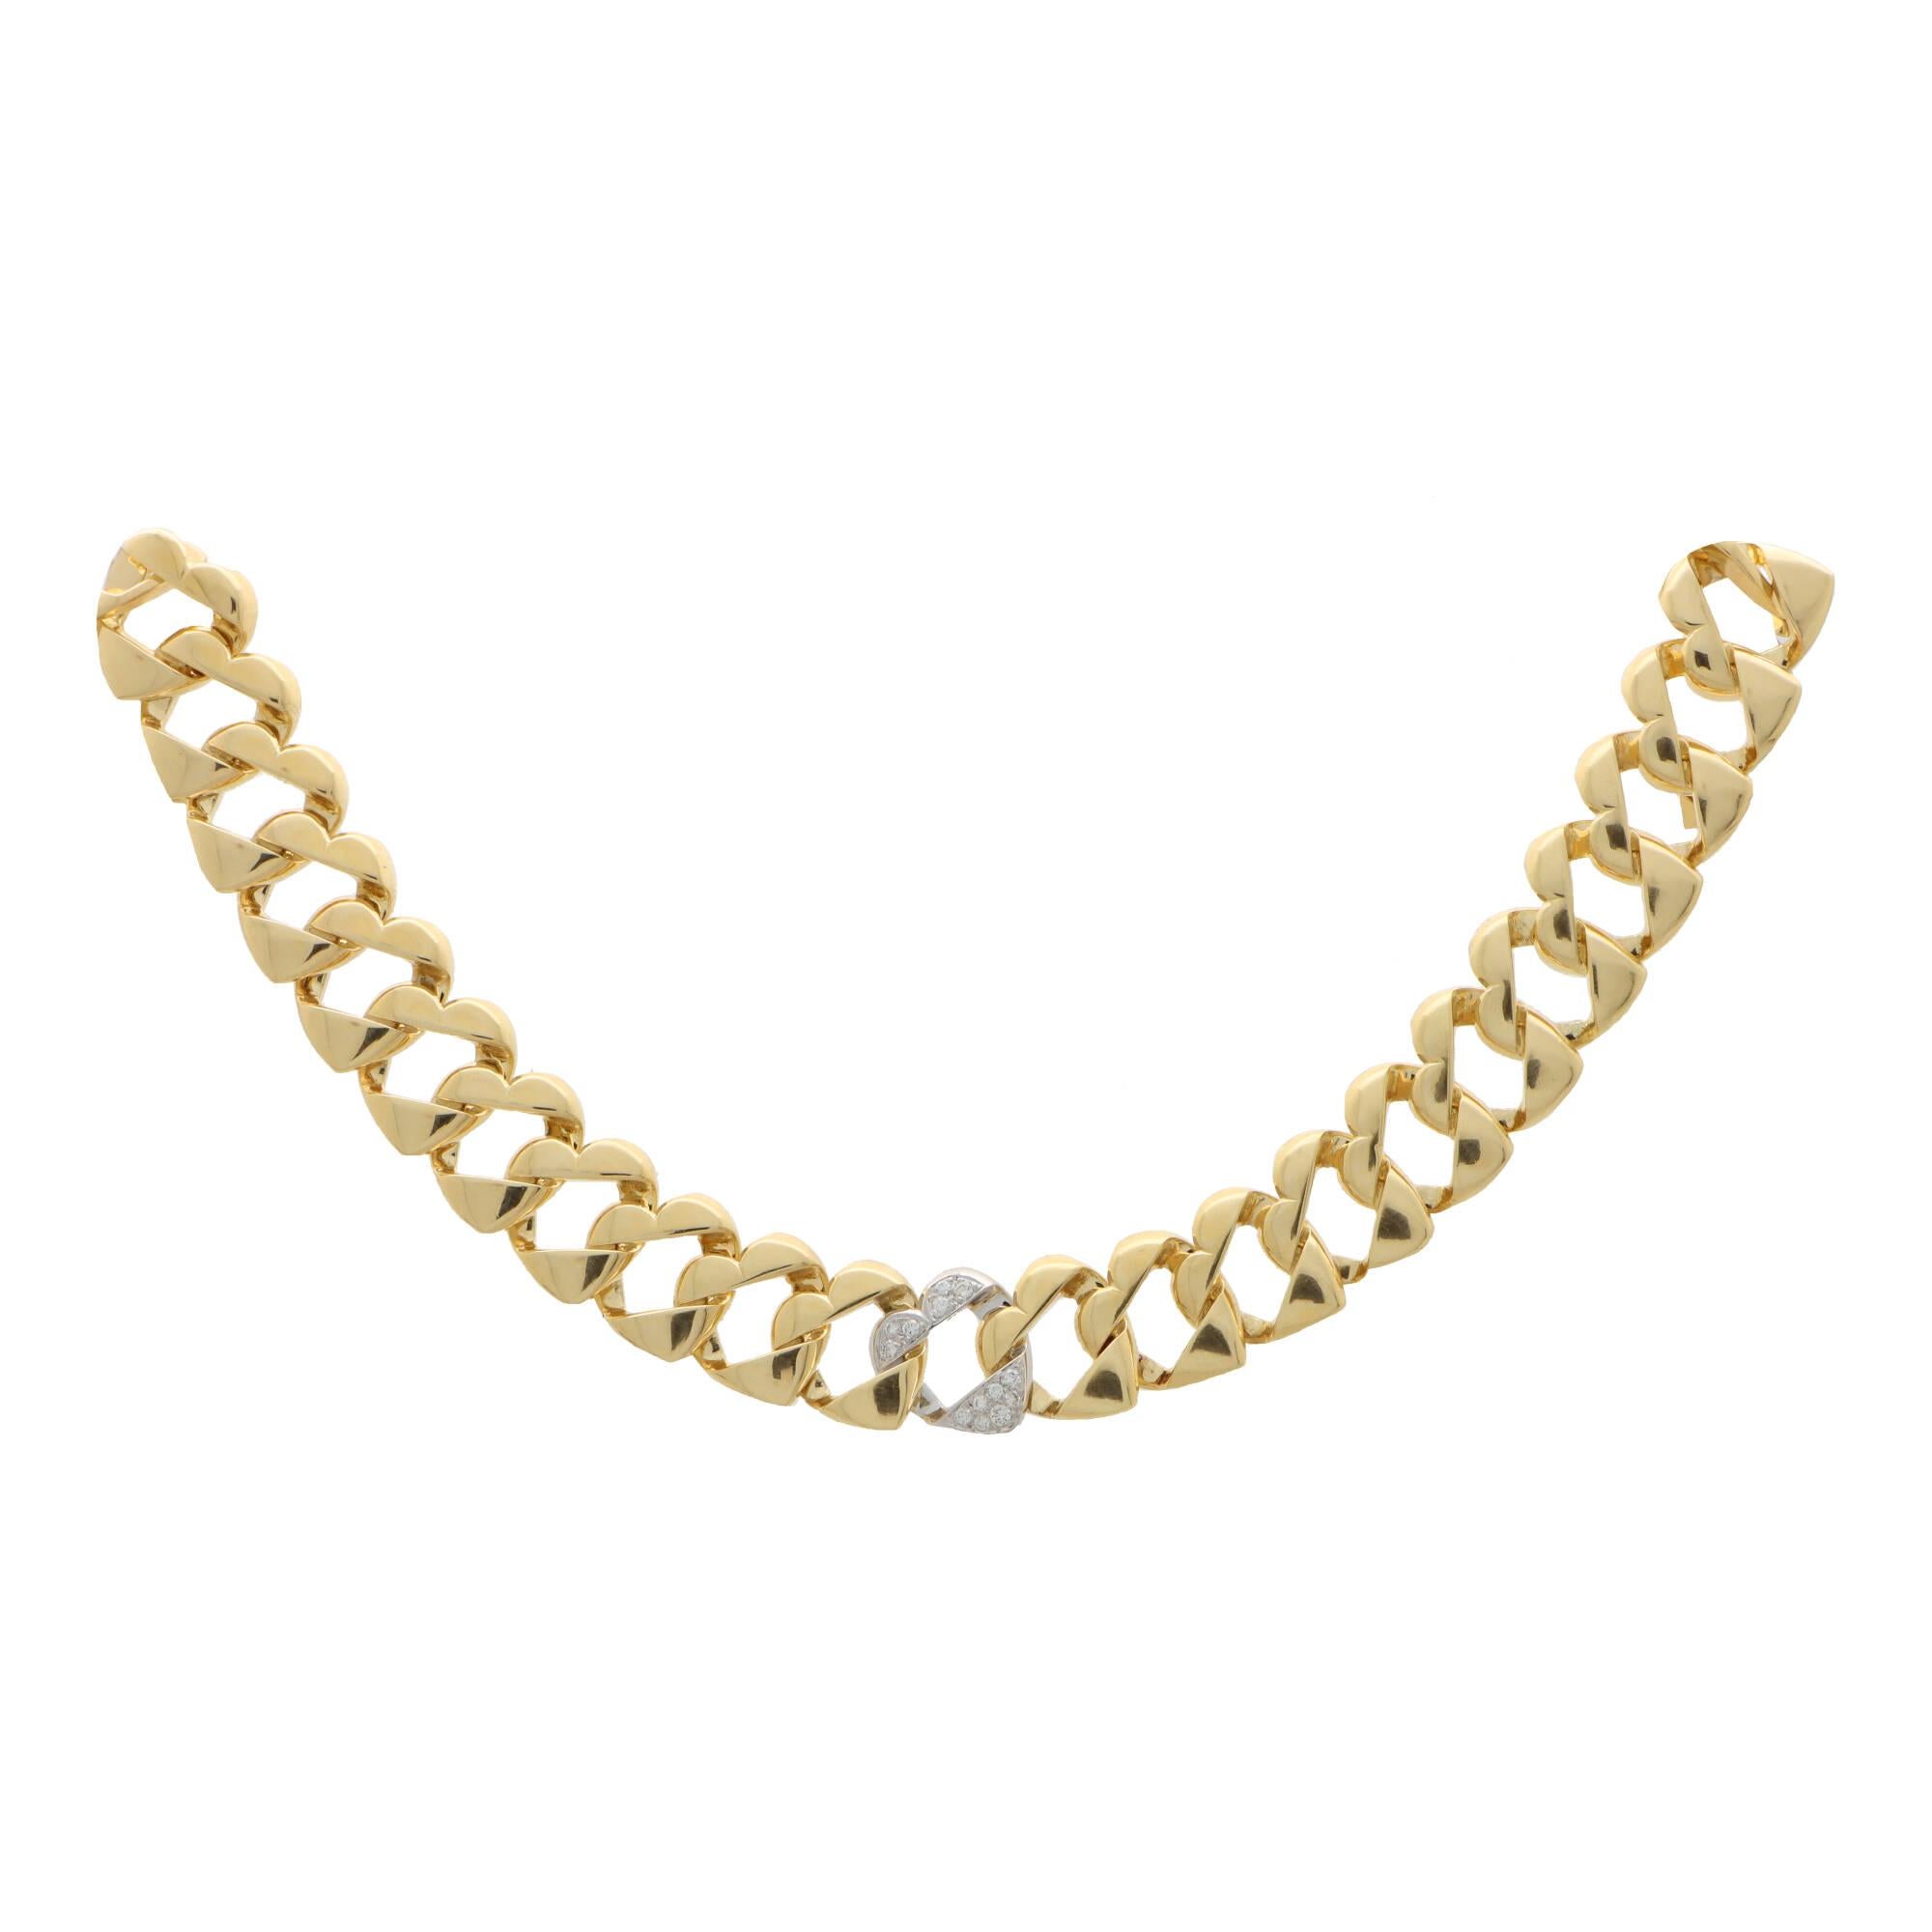 A beautiful vintage Tiffany & Co. twisted heart flat curb link necklace set in 18k yellow and white gold.

The necklace is composed of 49 individual heart styled flat curb links and sits beautifully once on the neck. The necklace feels fabulous to